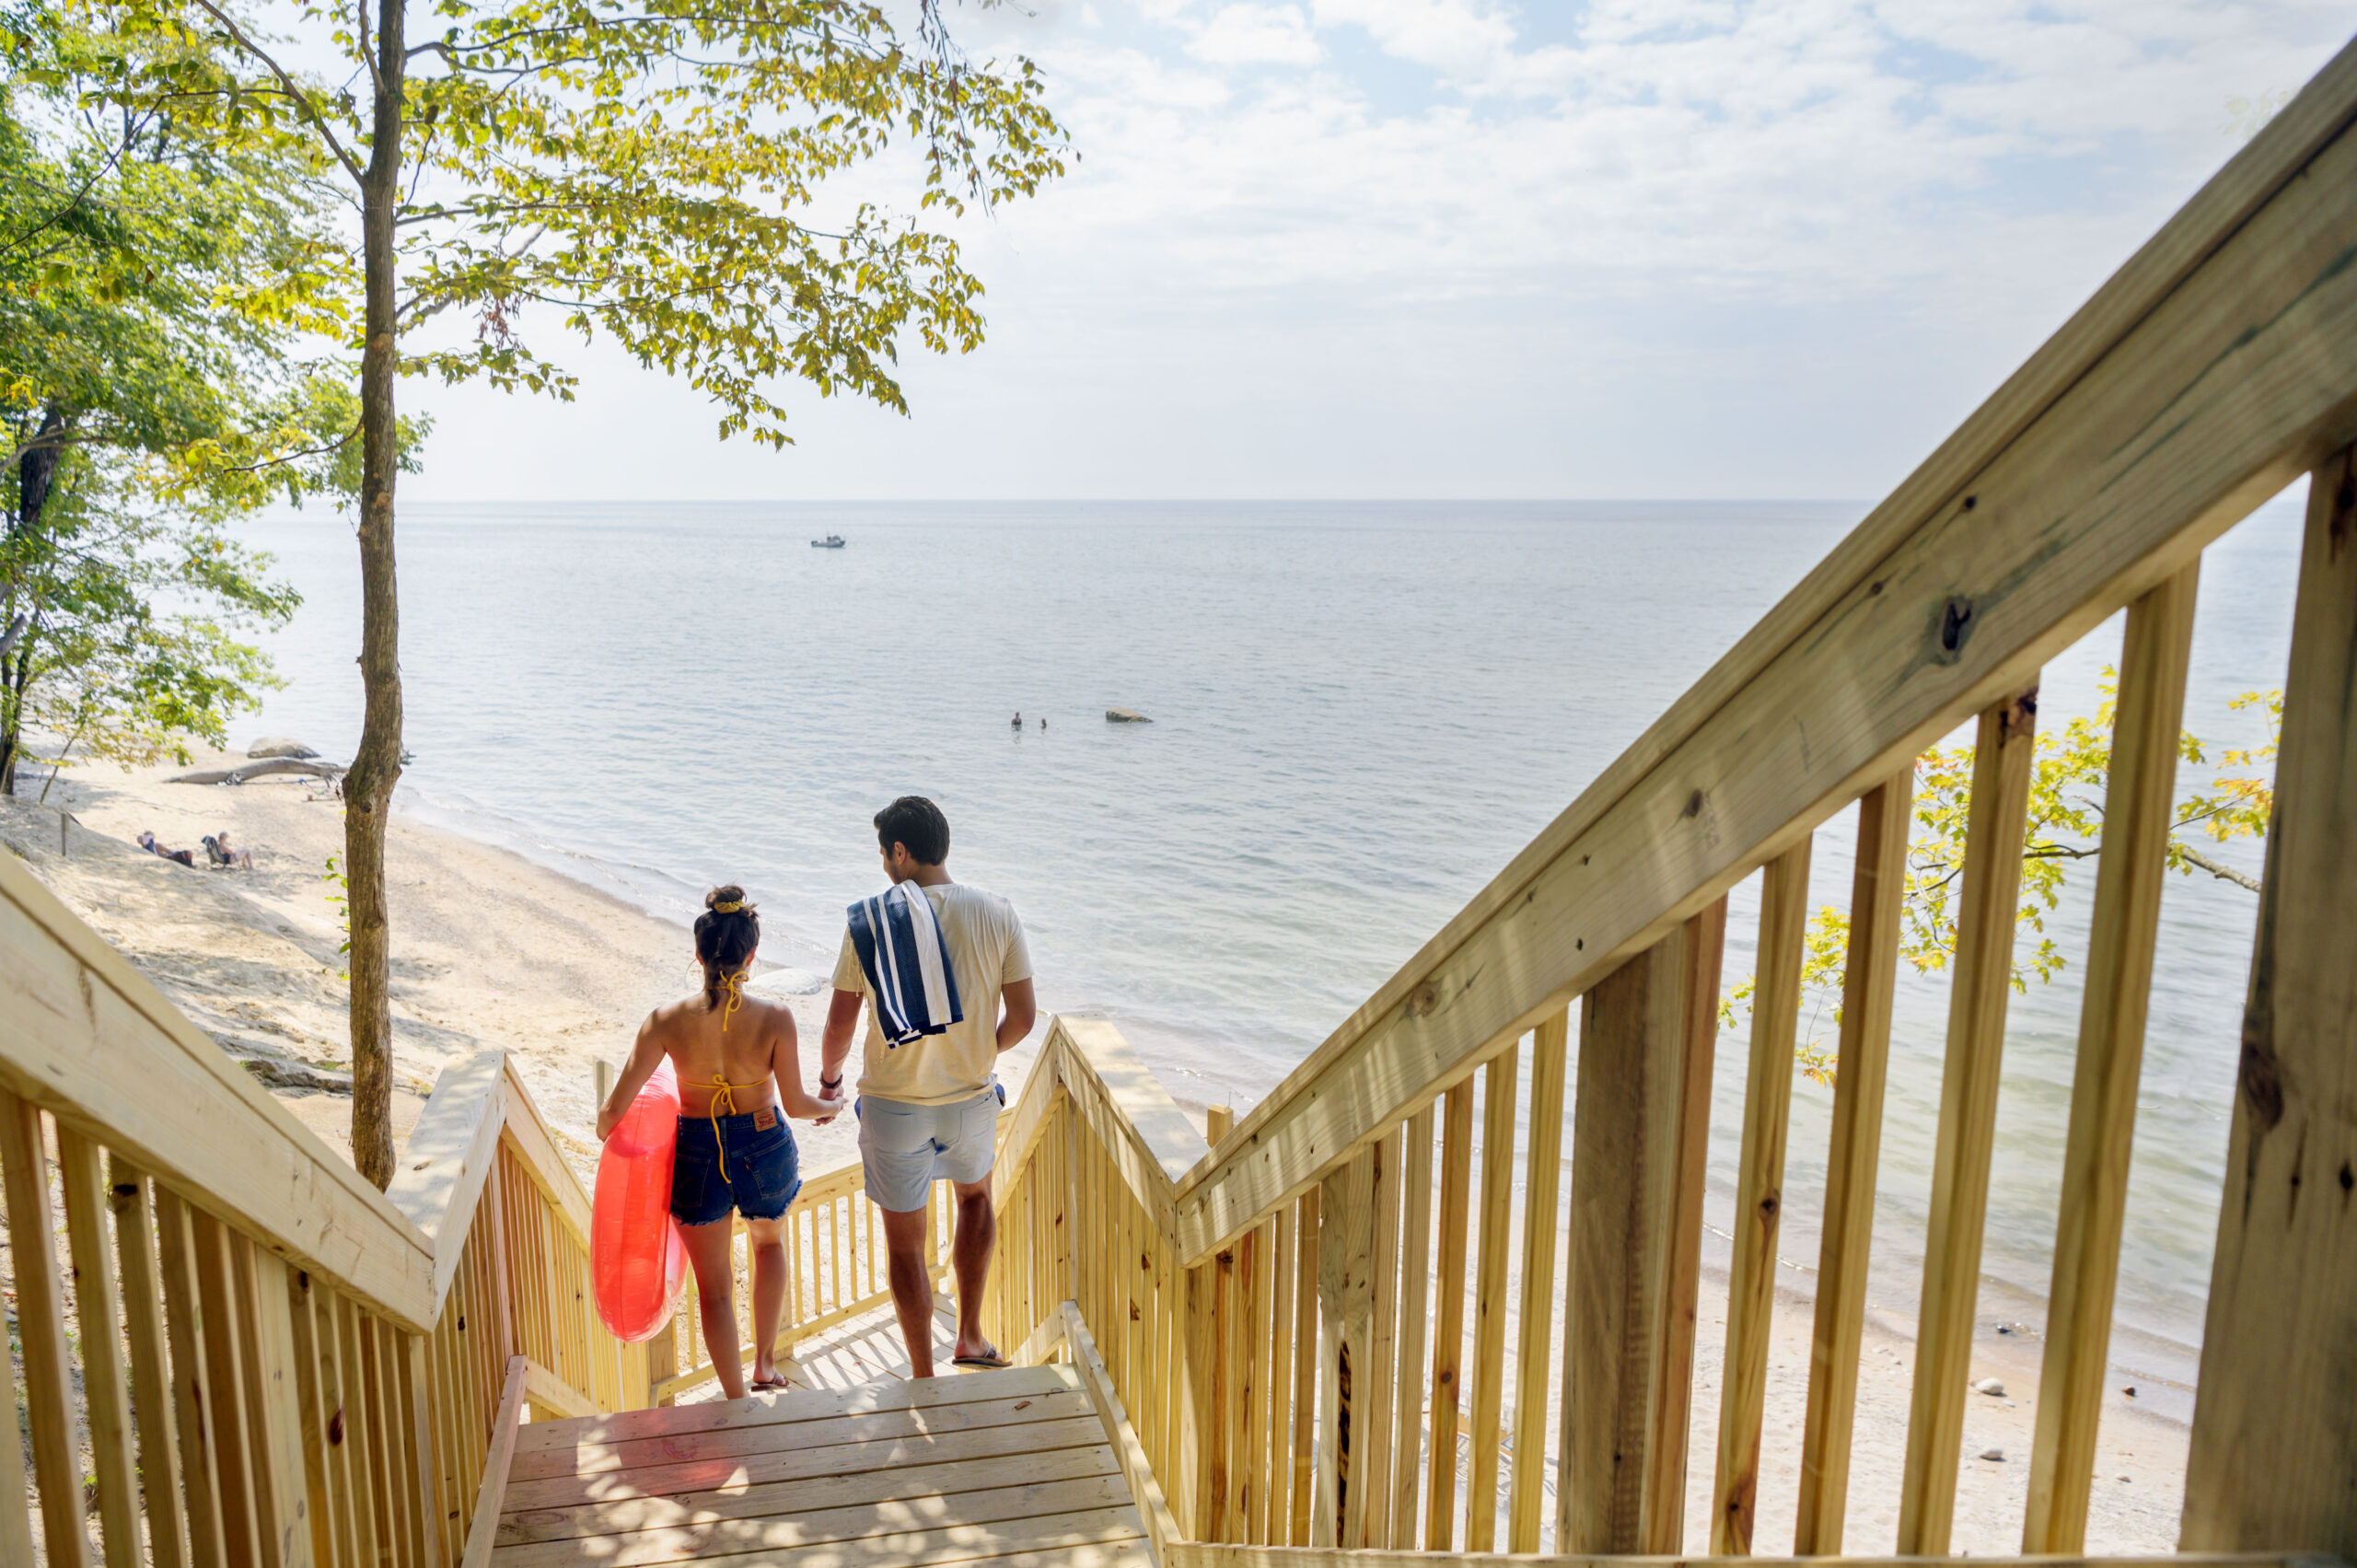 Man and woman walking down stairs to beach with beach gear.